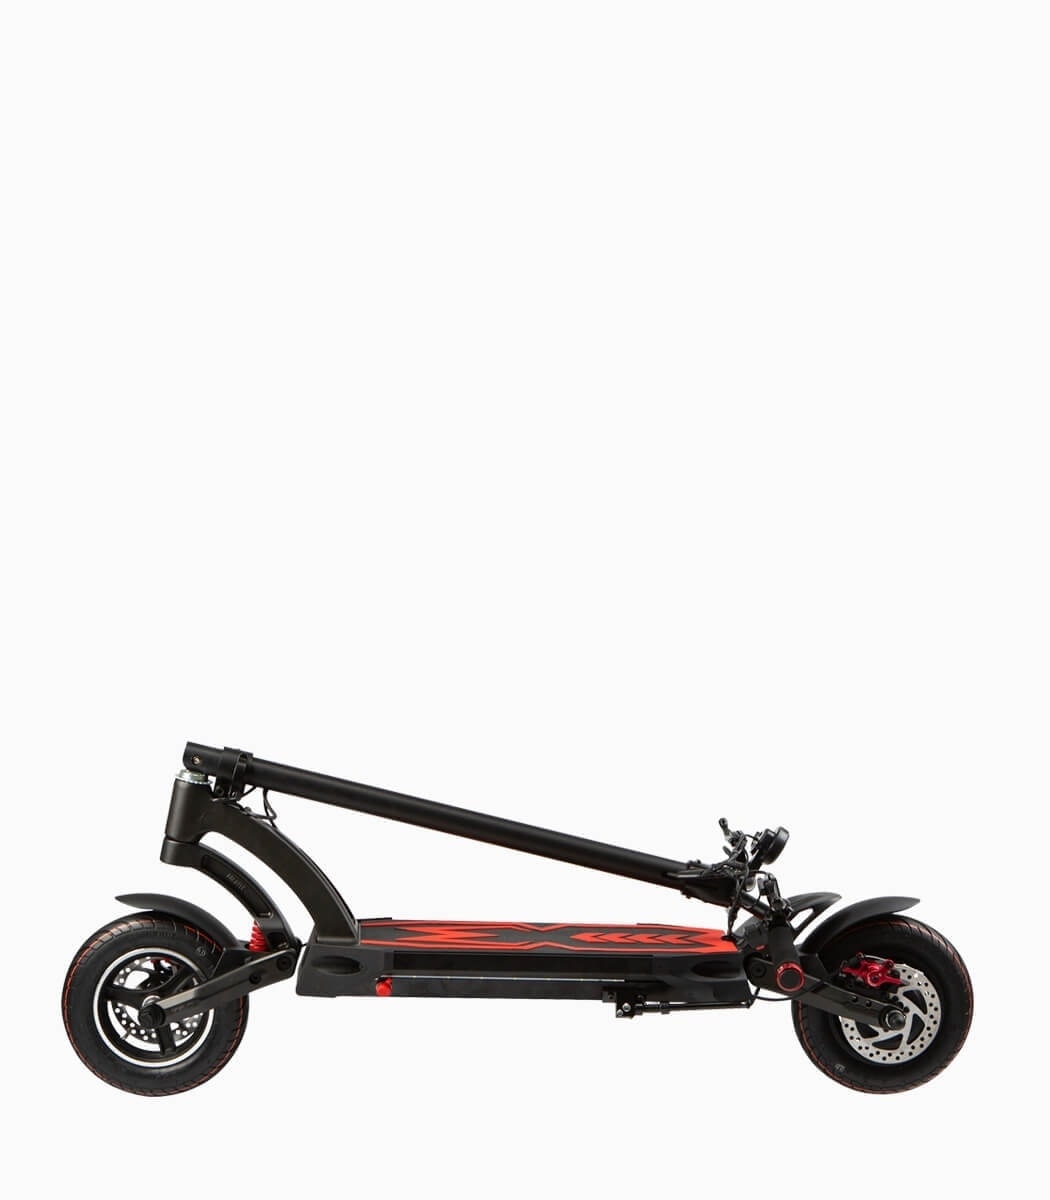 MOBOT MANTIS (RED10AH) UL2272 certified high performance electric scooter folded left